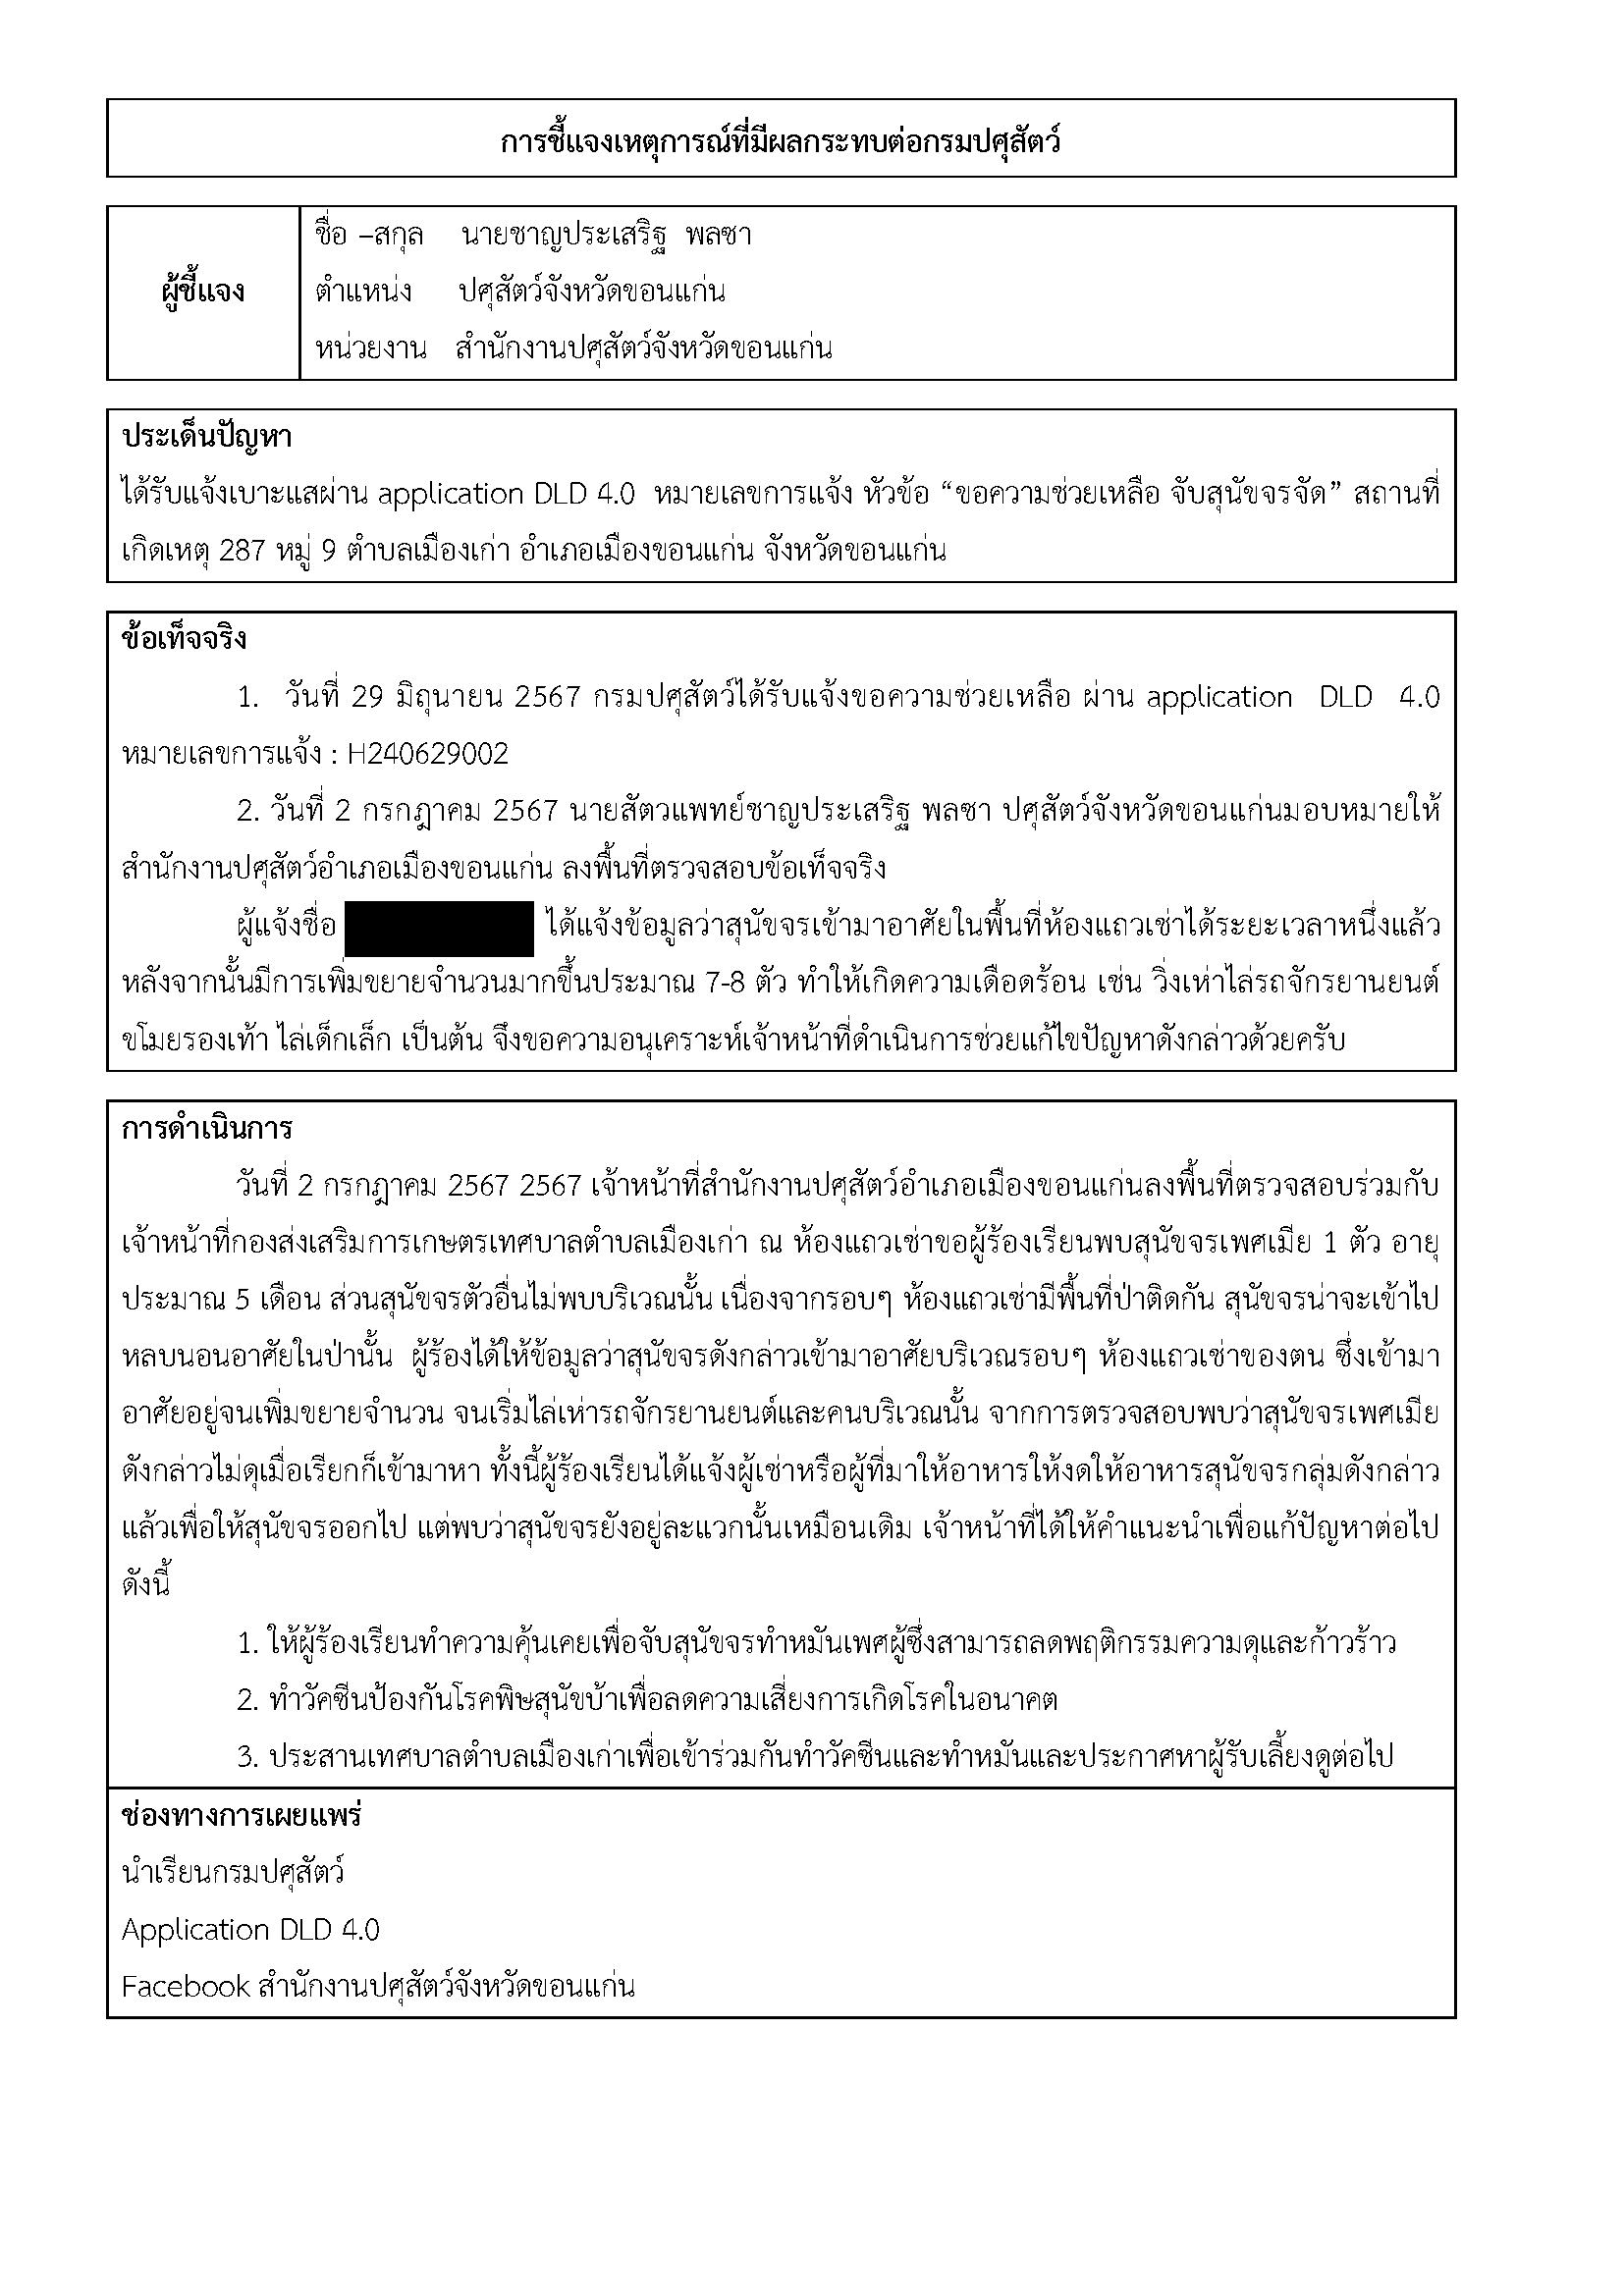 IO 2 7 67 Redacted Page 1